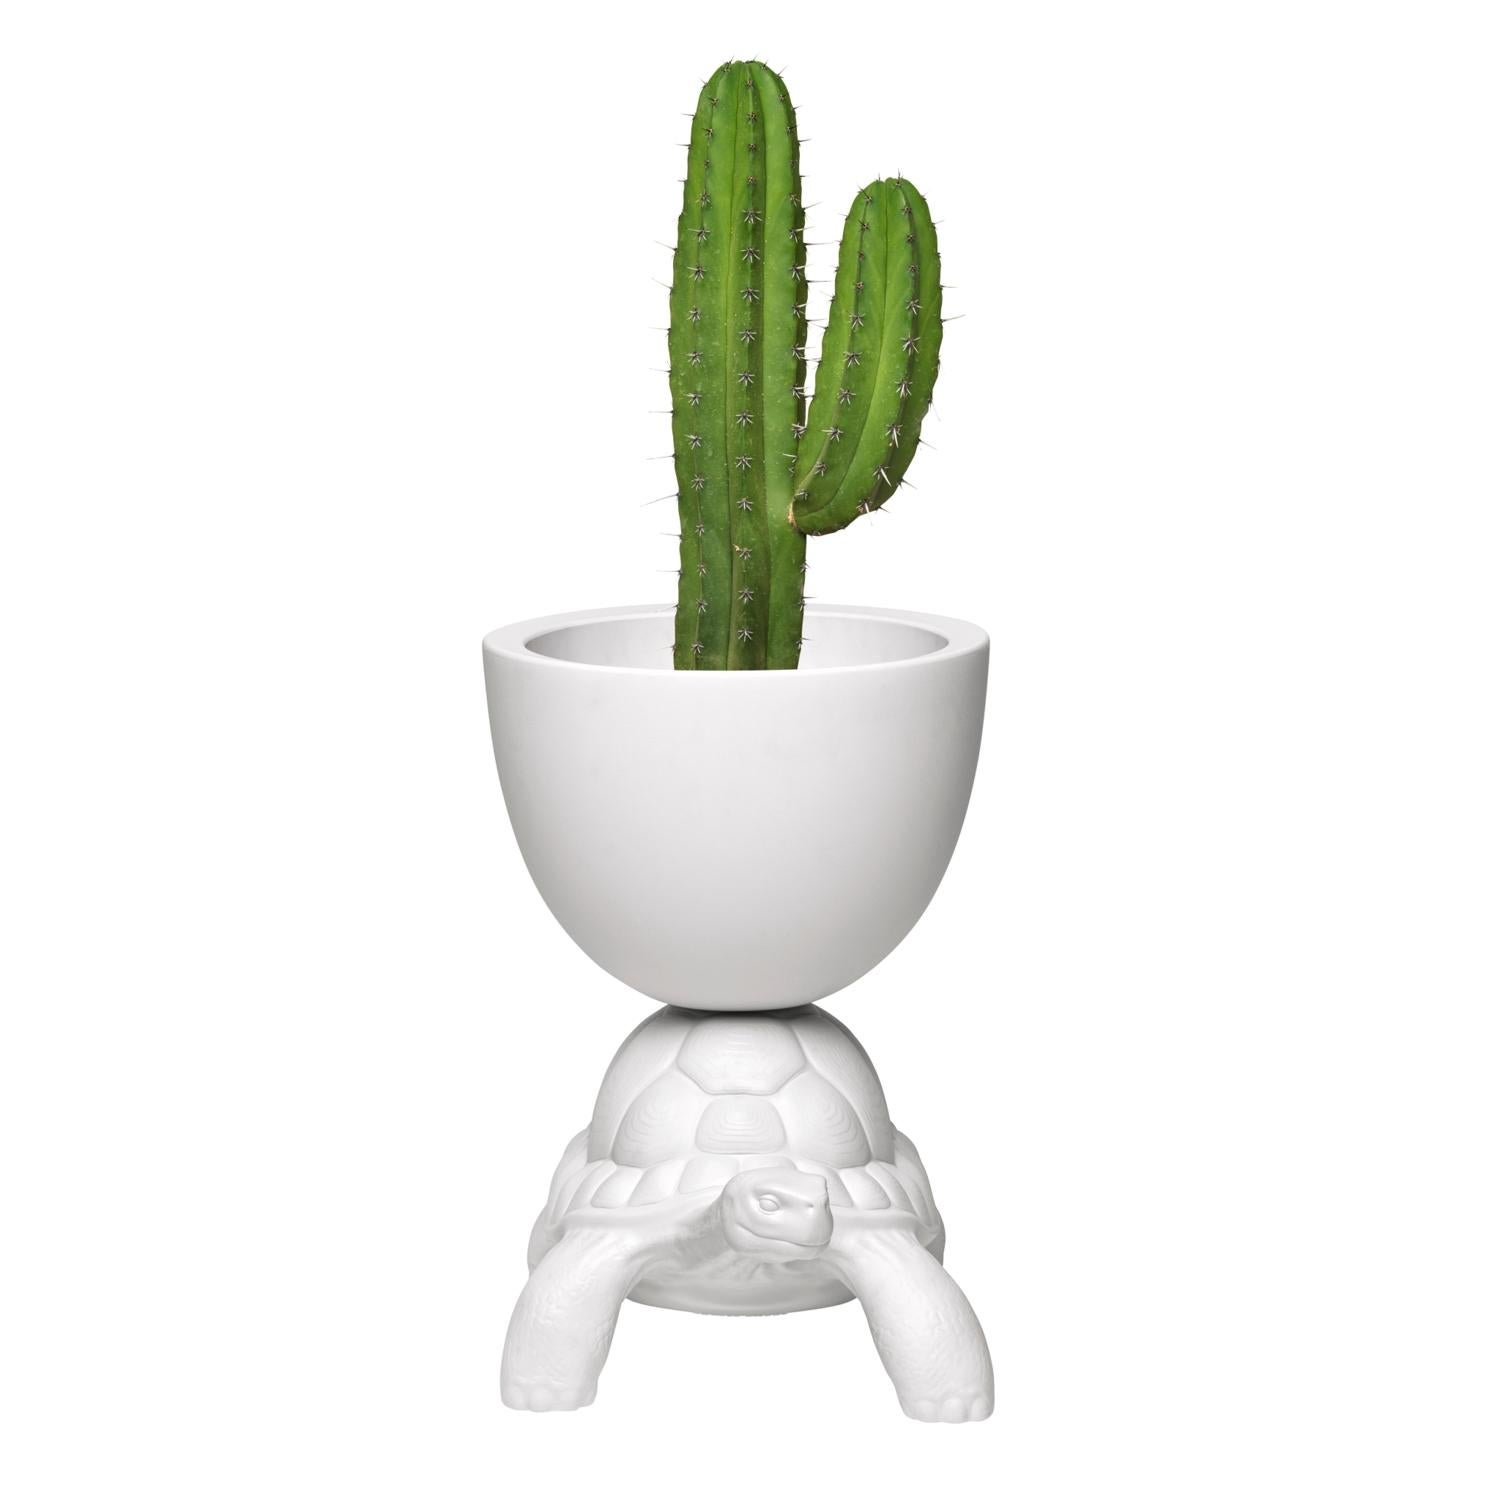 Italian In Stock in Los Angeles, White Turtle Carry Planter / Champagne Cooler